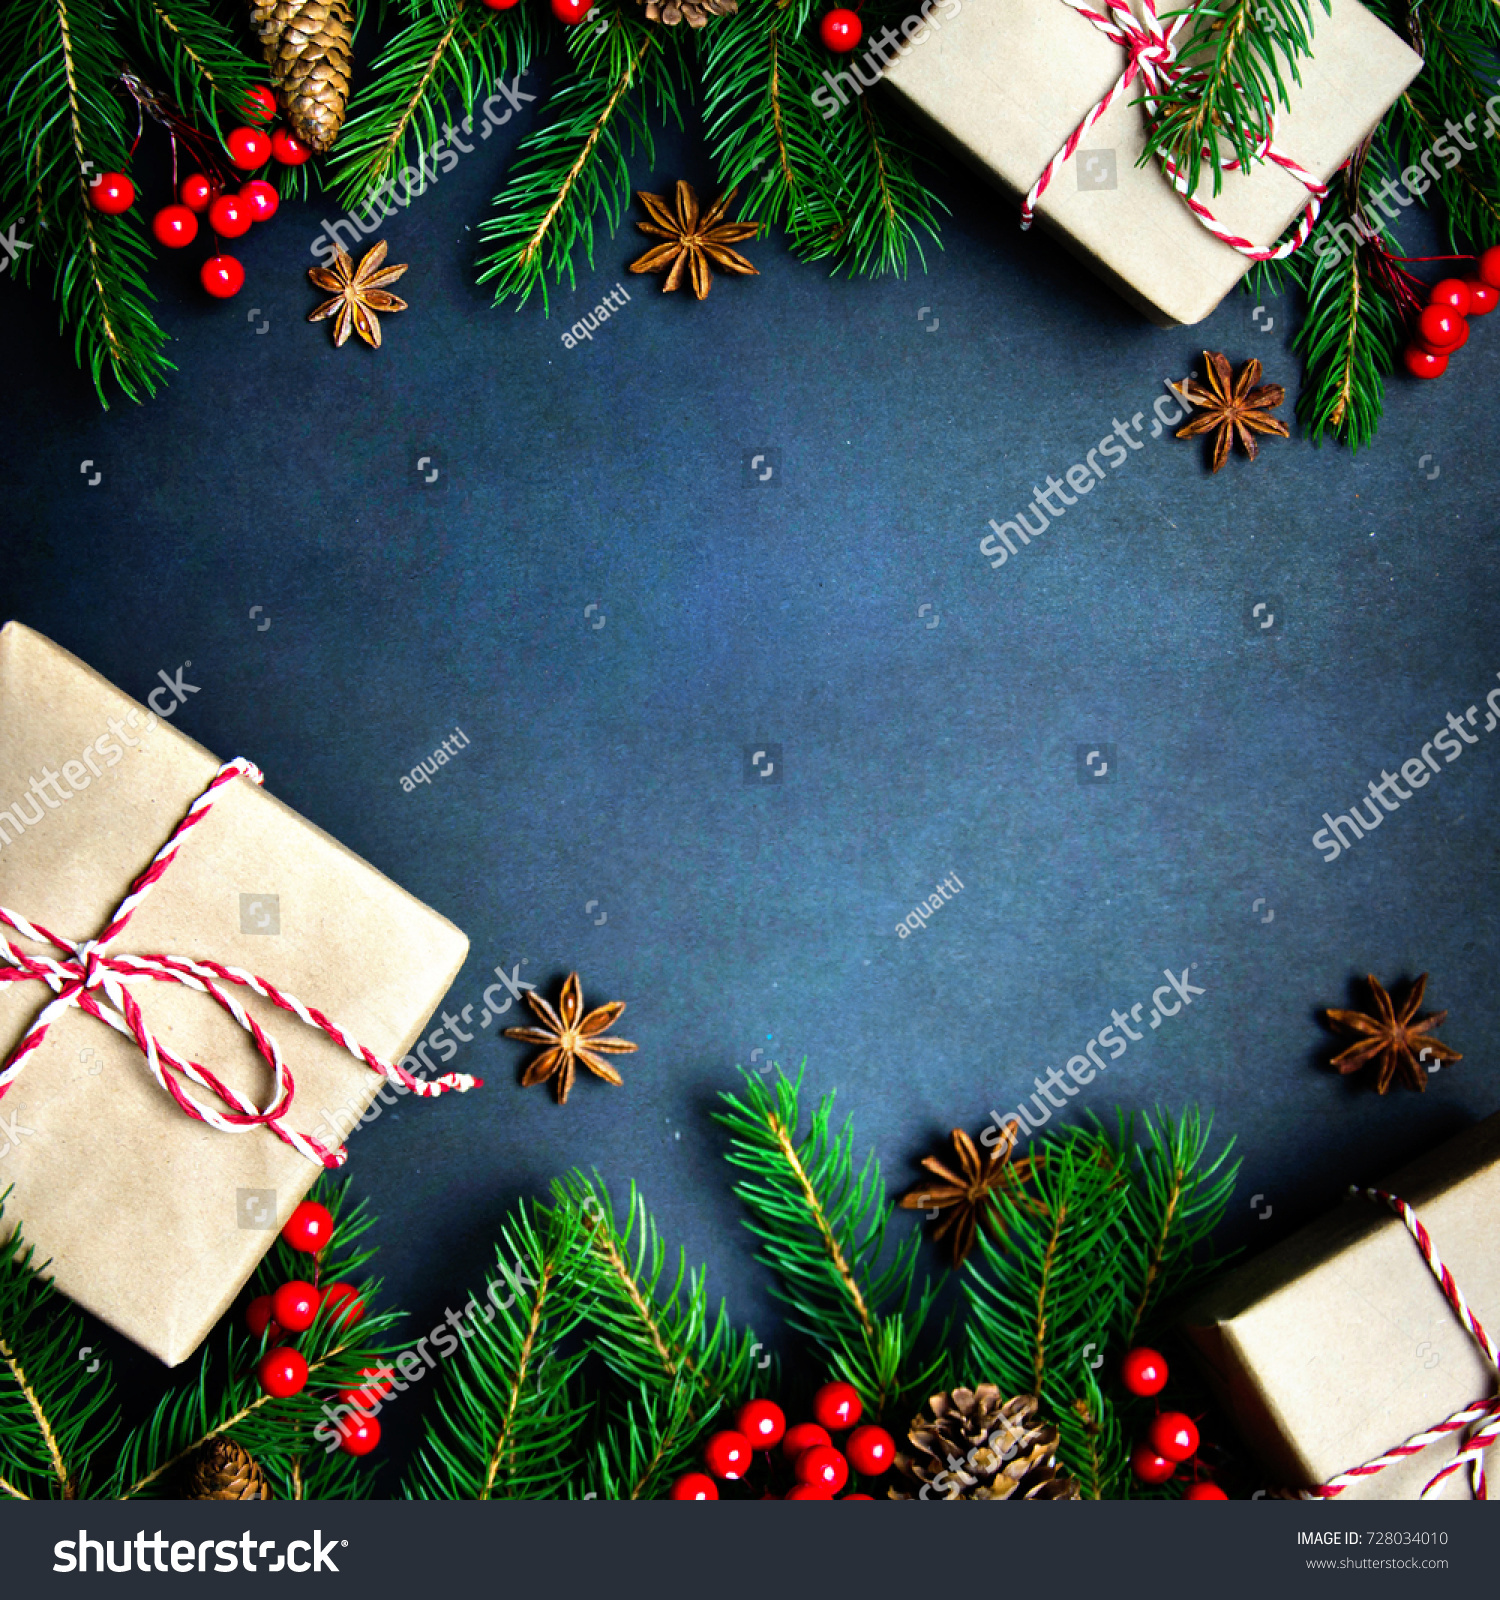 Christmas or New Year dark background, Xmas black board framed with season decorations, space for a text, view from above #728034010